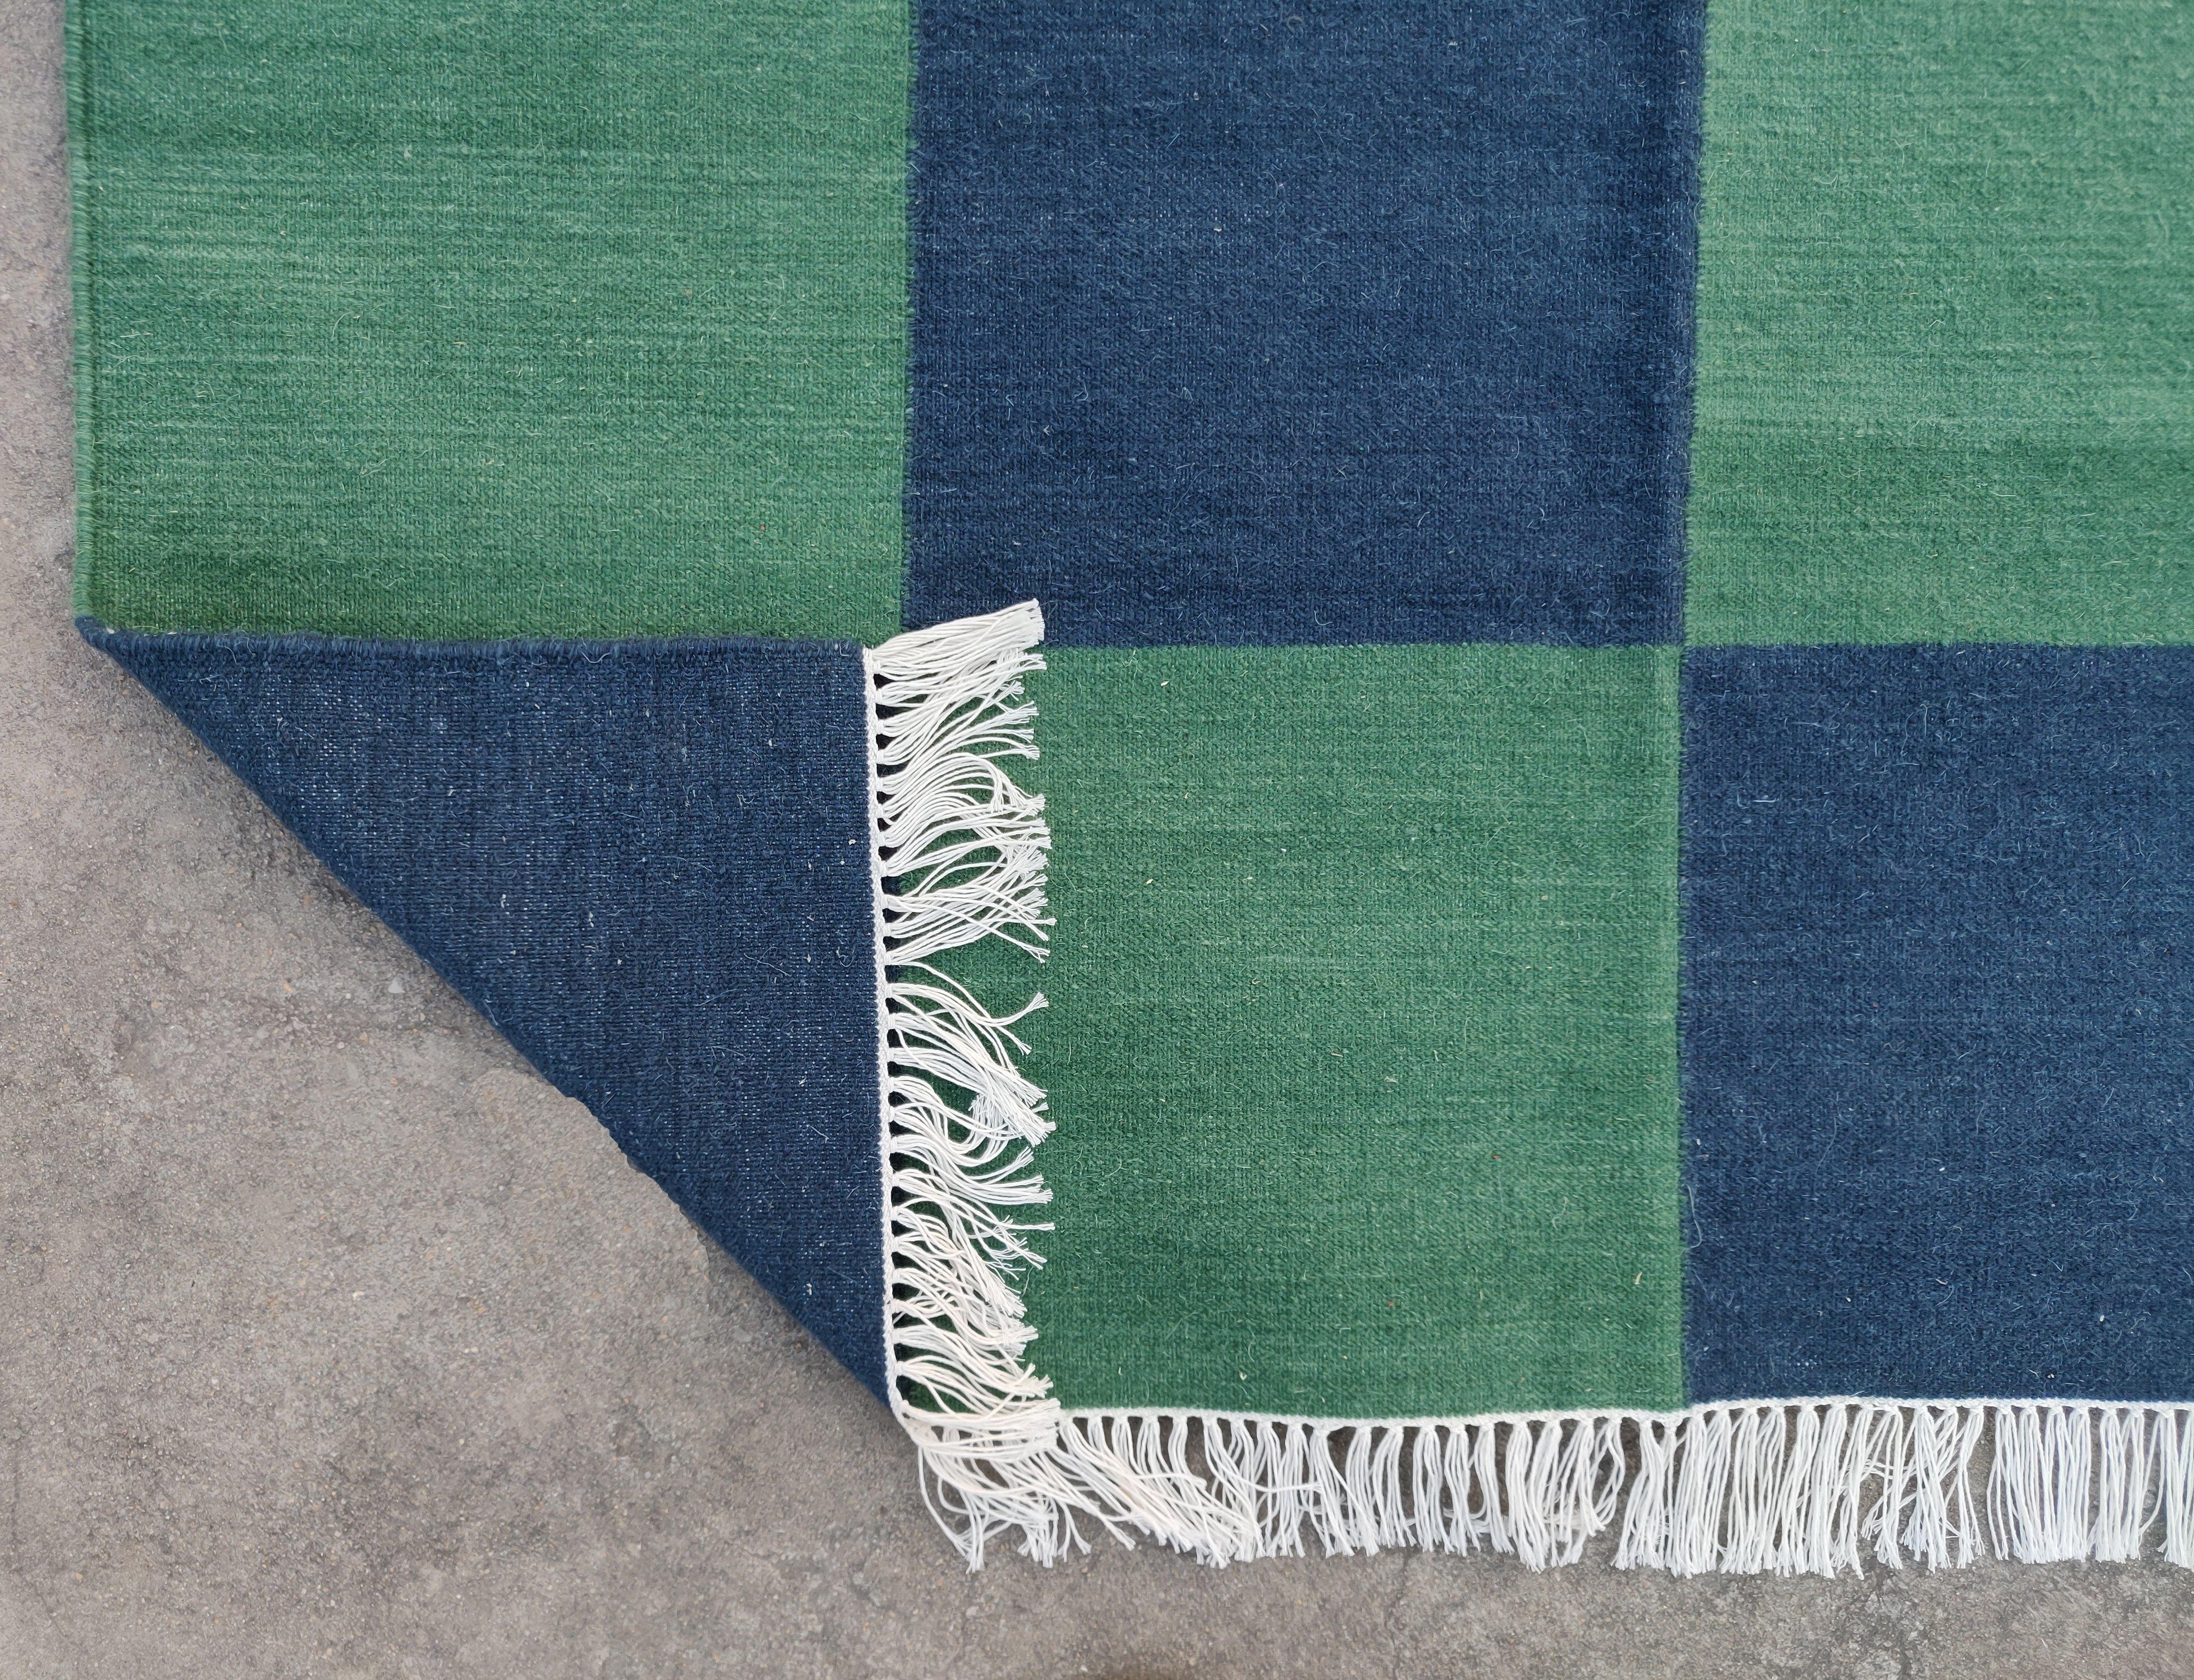 Handmade Woolen Area Flat Weave Rug, 6x9 Blue And Green Tile Checked Dhurrie Rug For Sale 5